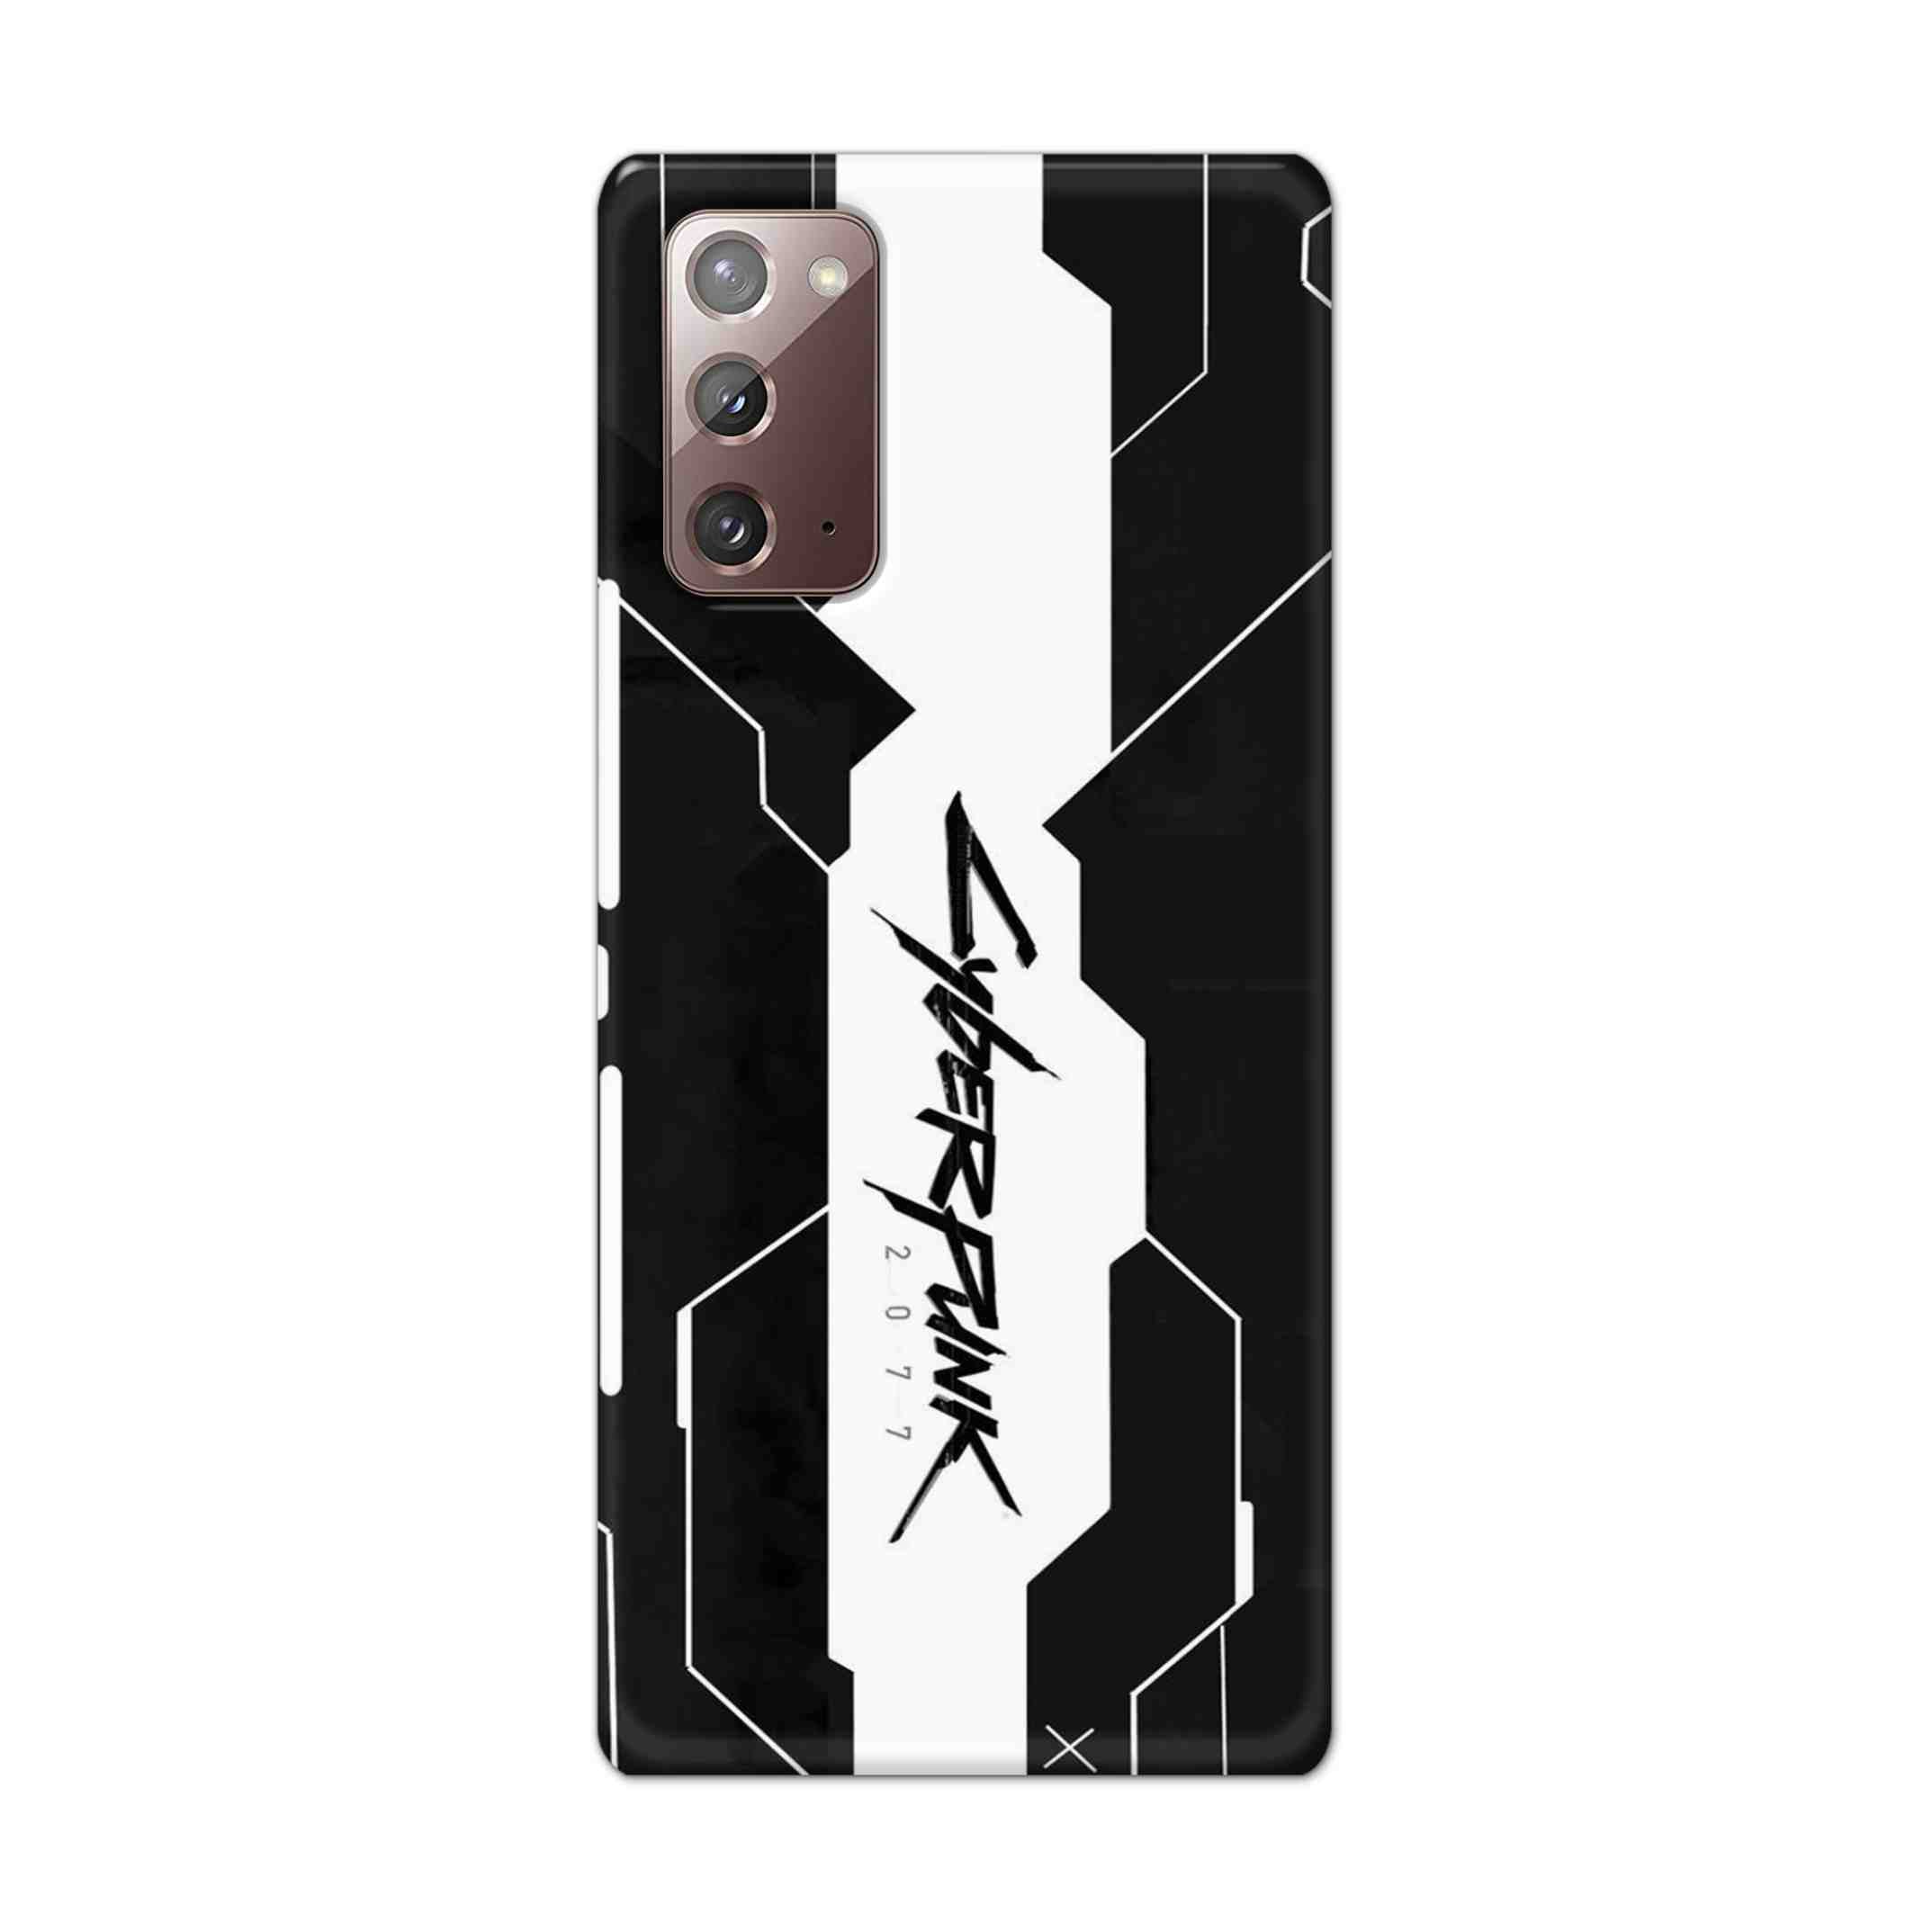 Buy Cyberpunk 2077 Art Hard Back Mobile Phone Case Cover For Samsung Galaxy Note 20 Online